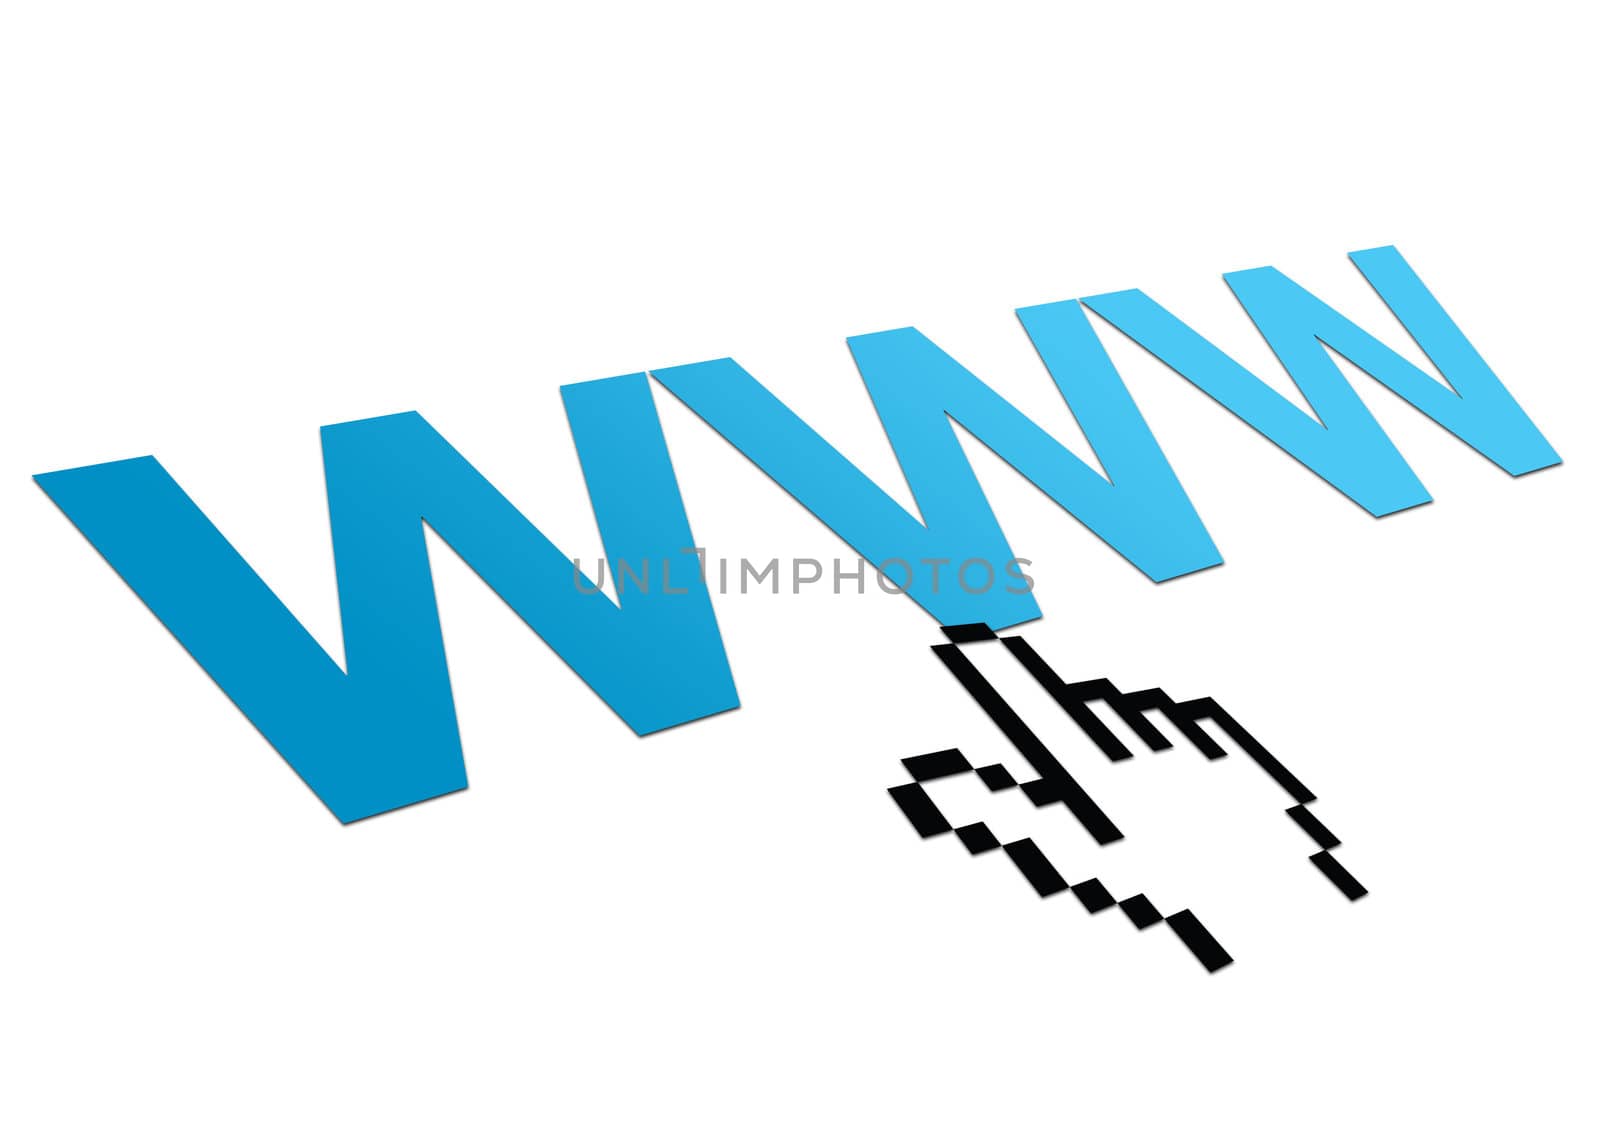 High resolution perspective graphic of a www sign with hand cursor.